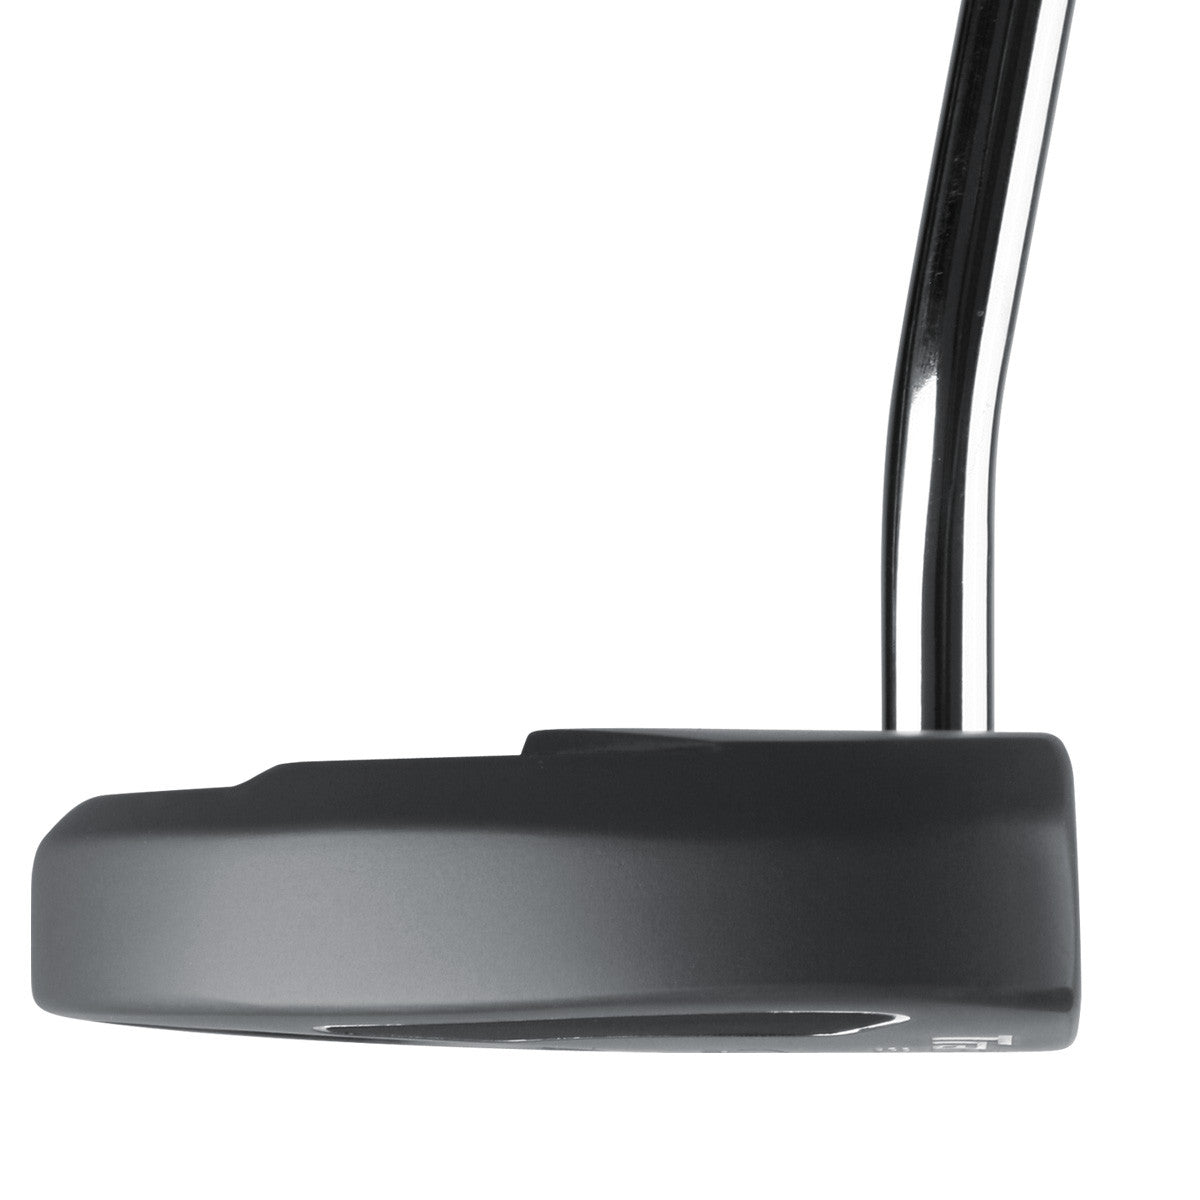 toe view of the Intech Trakker Series 2 Mallet Putter with double bend putter shaft